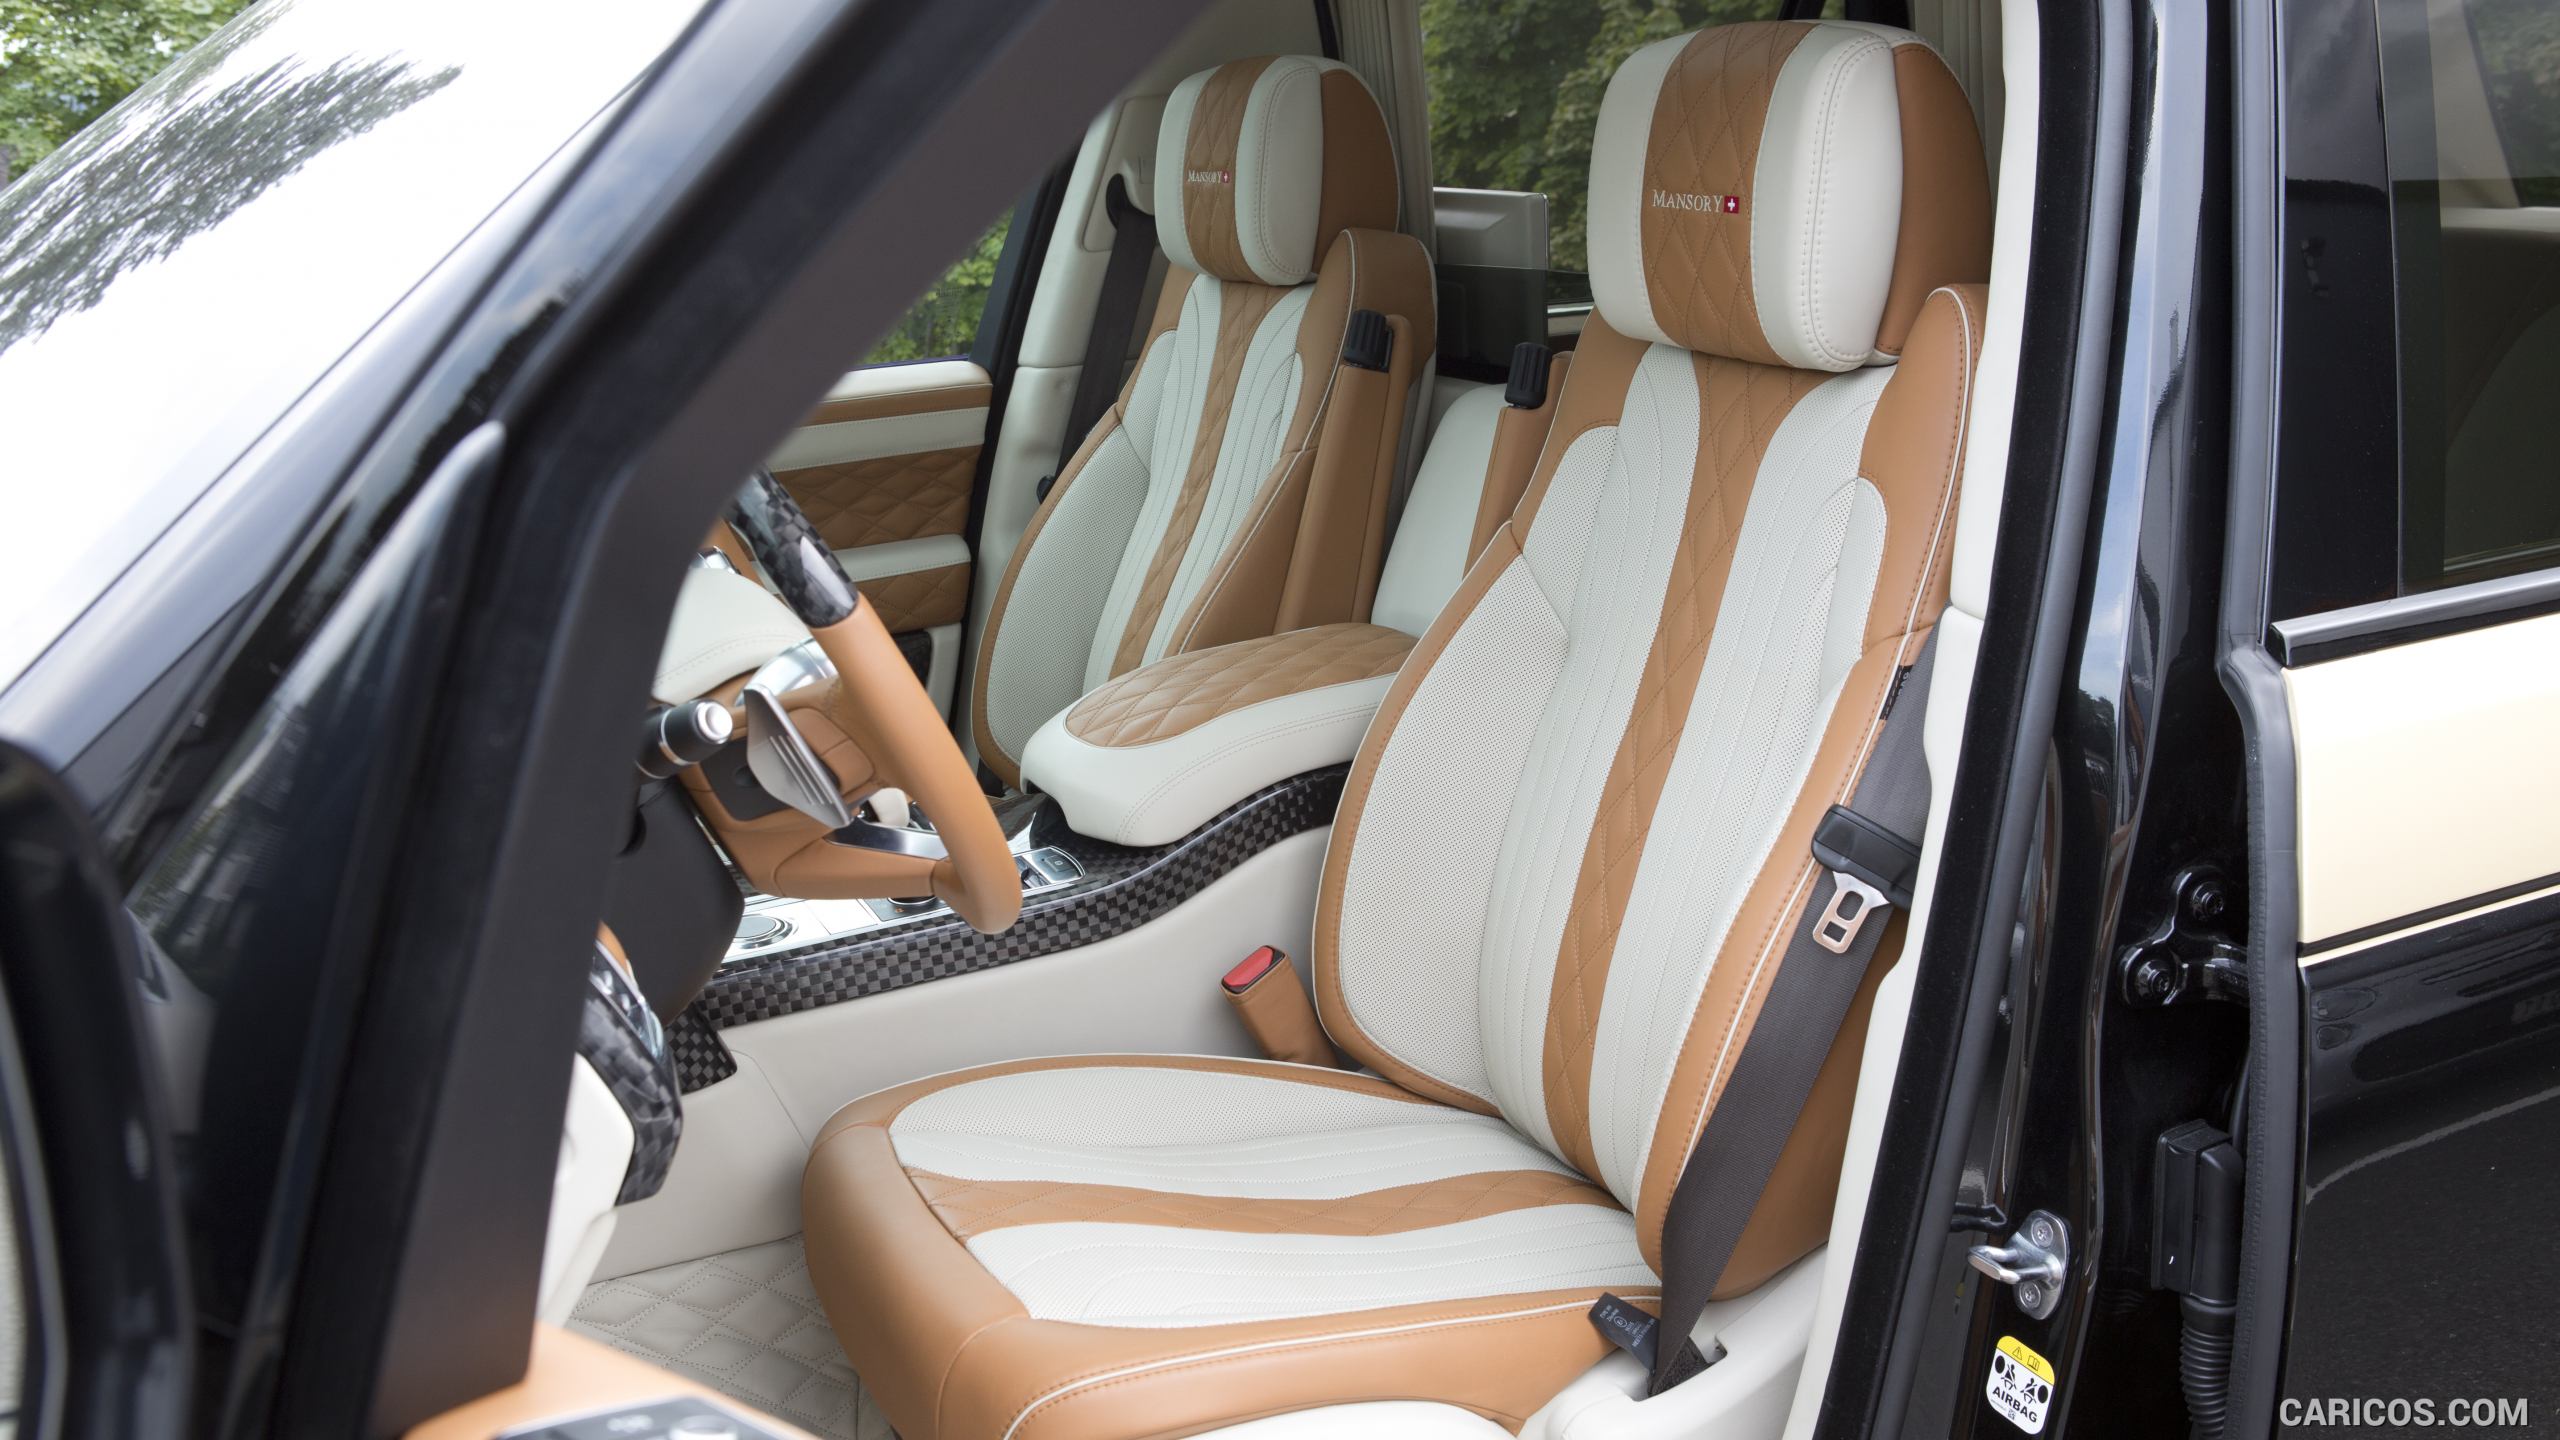 2016 MANSORY Range Rover Autobiography Extended - Interior Front Seats, #8 of 12